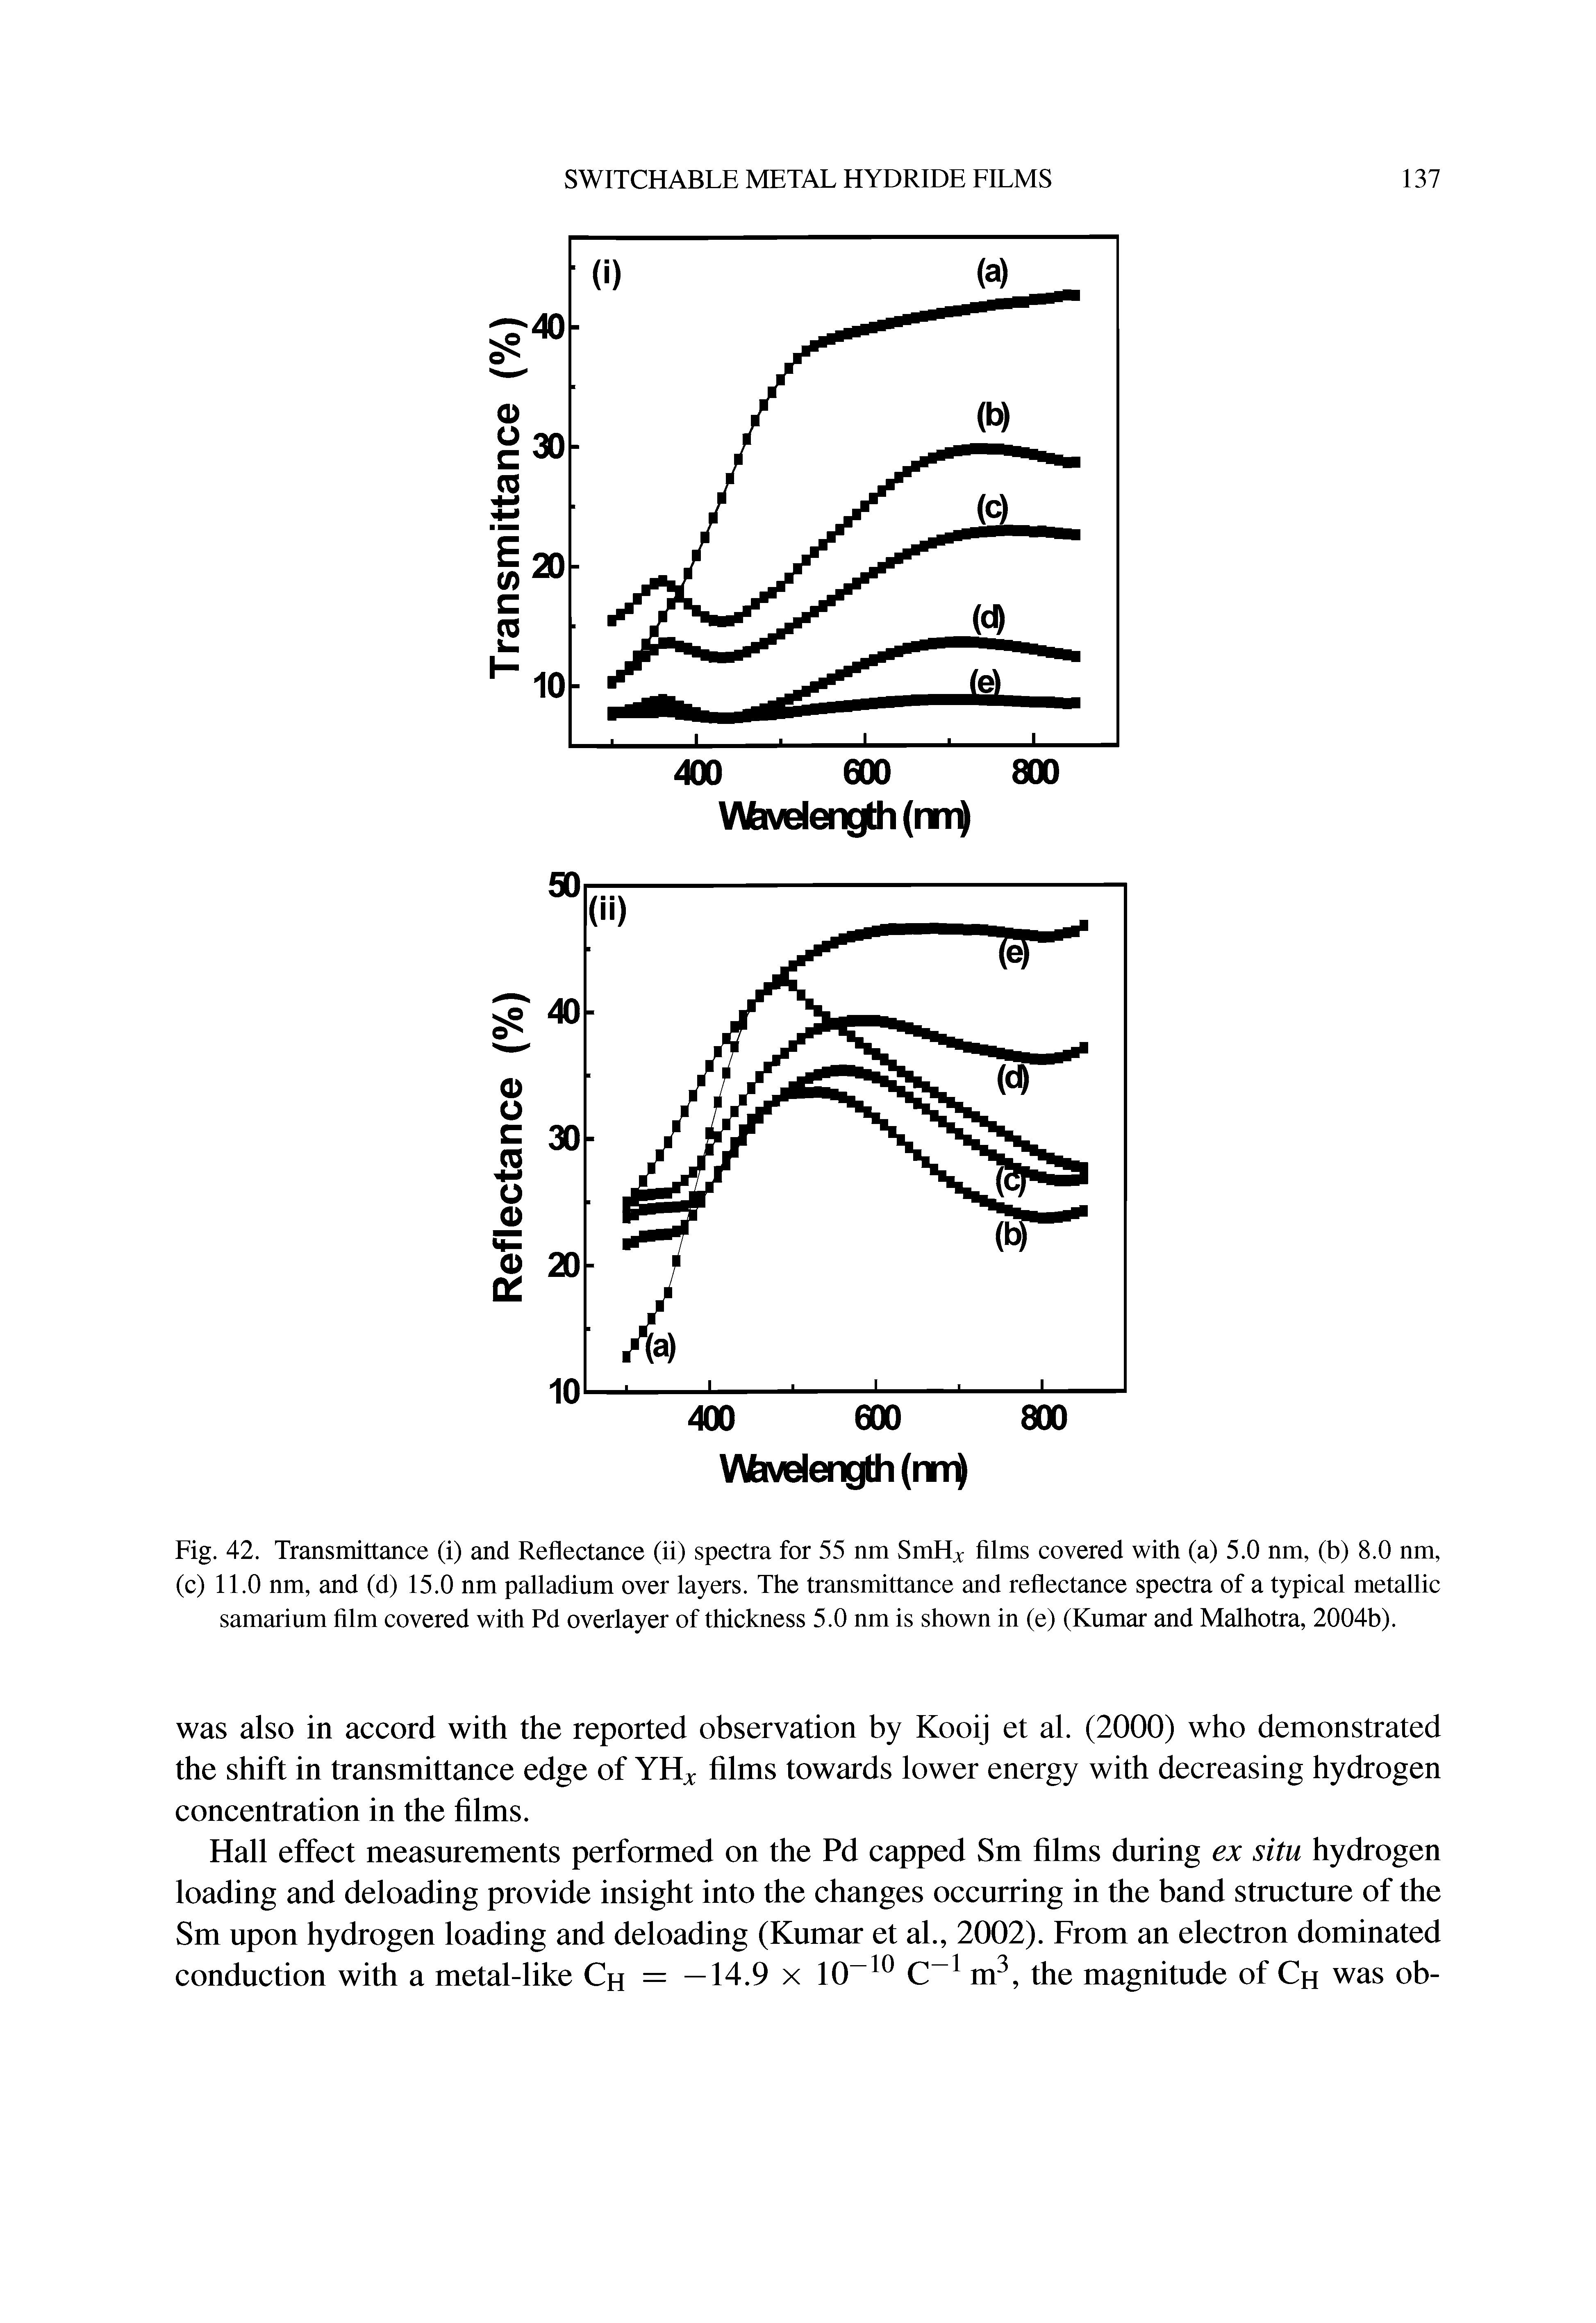 Fig. 42. Transmittance (i) and Reflectance (ii) spectra for 55 nm SmRx Alms covered with (a) 5.0 nm, (b) 8.0 nm, (c) 11.0 nm, and (d) 15.0 nm palladium over layers. The transmittance and reflectance spectra of a typical metallic samarium film covered with Pd overlayer of thickness 5.0 nm is shown in (e) (Kumar and Malhotra, 2004b).